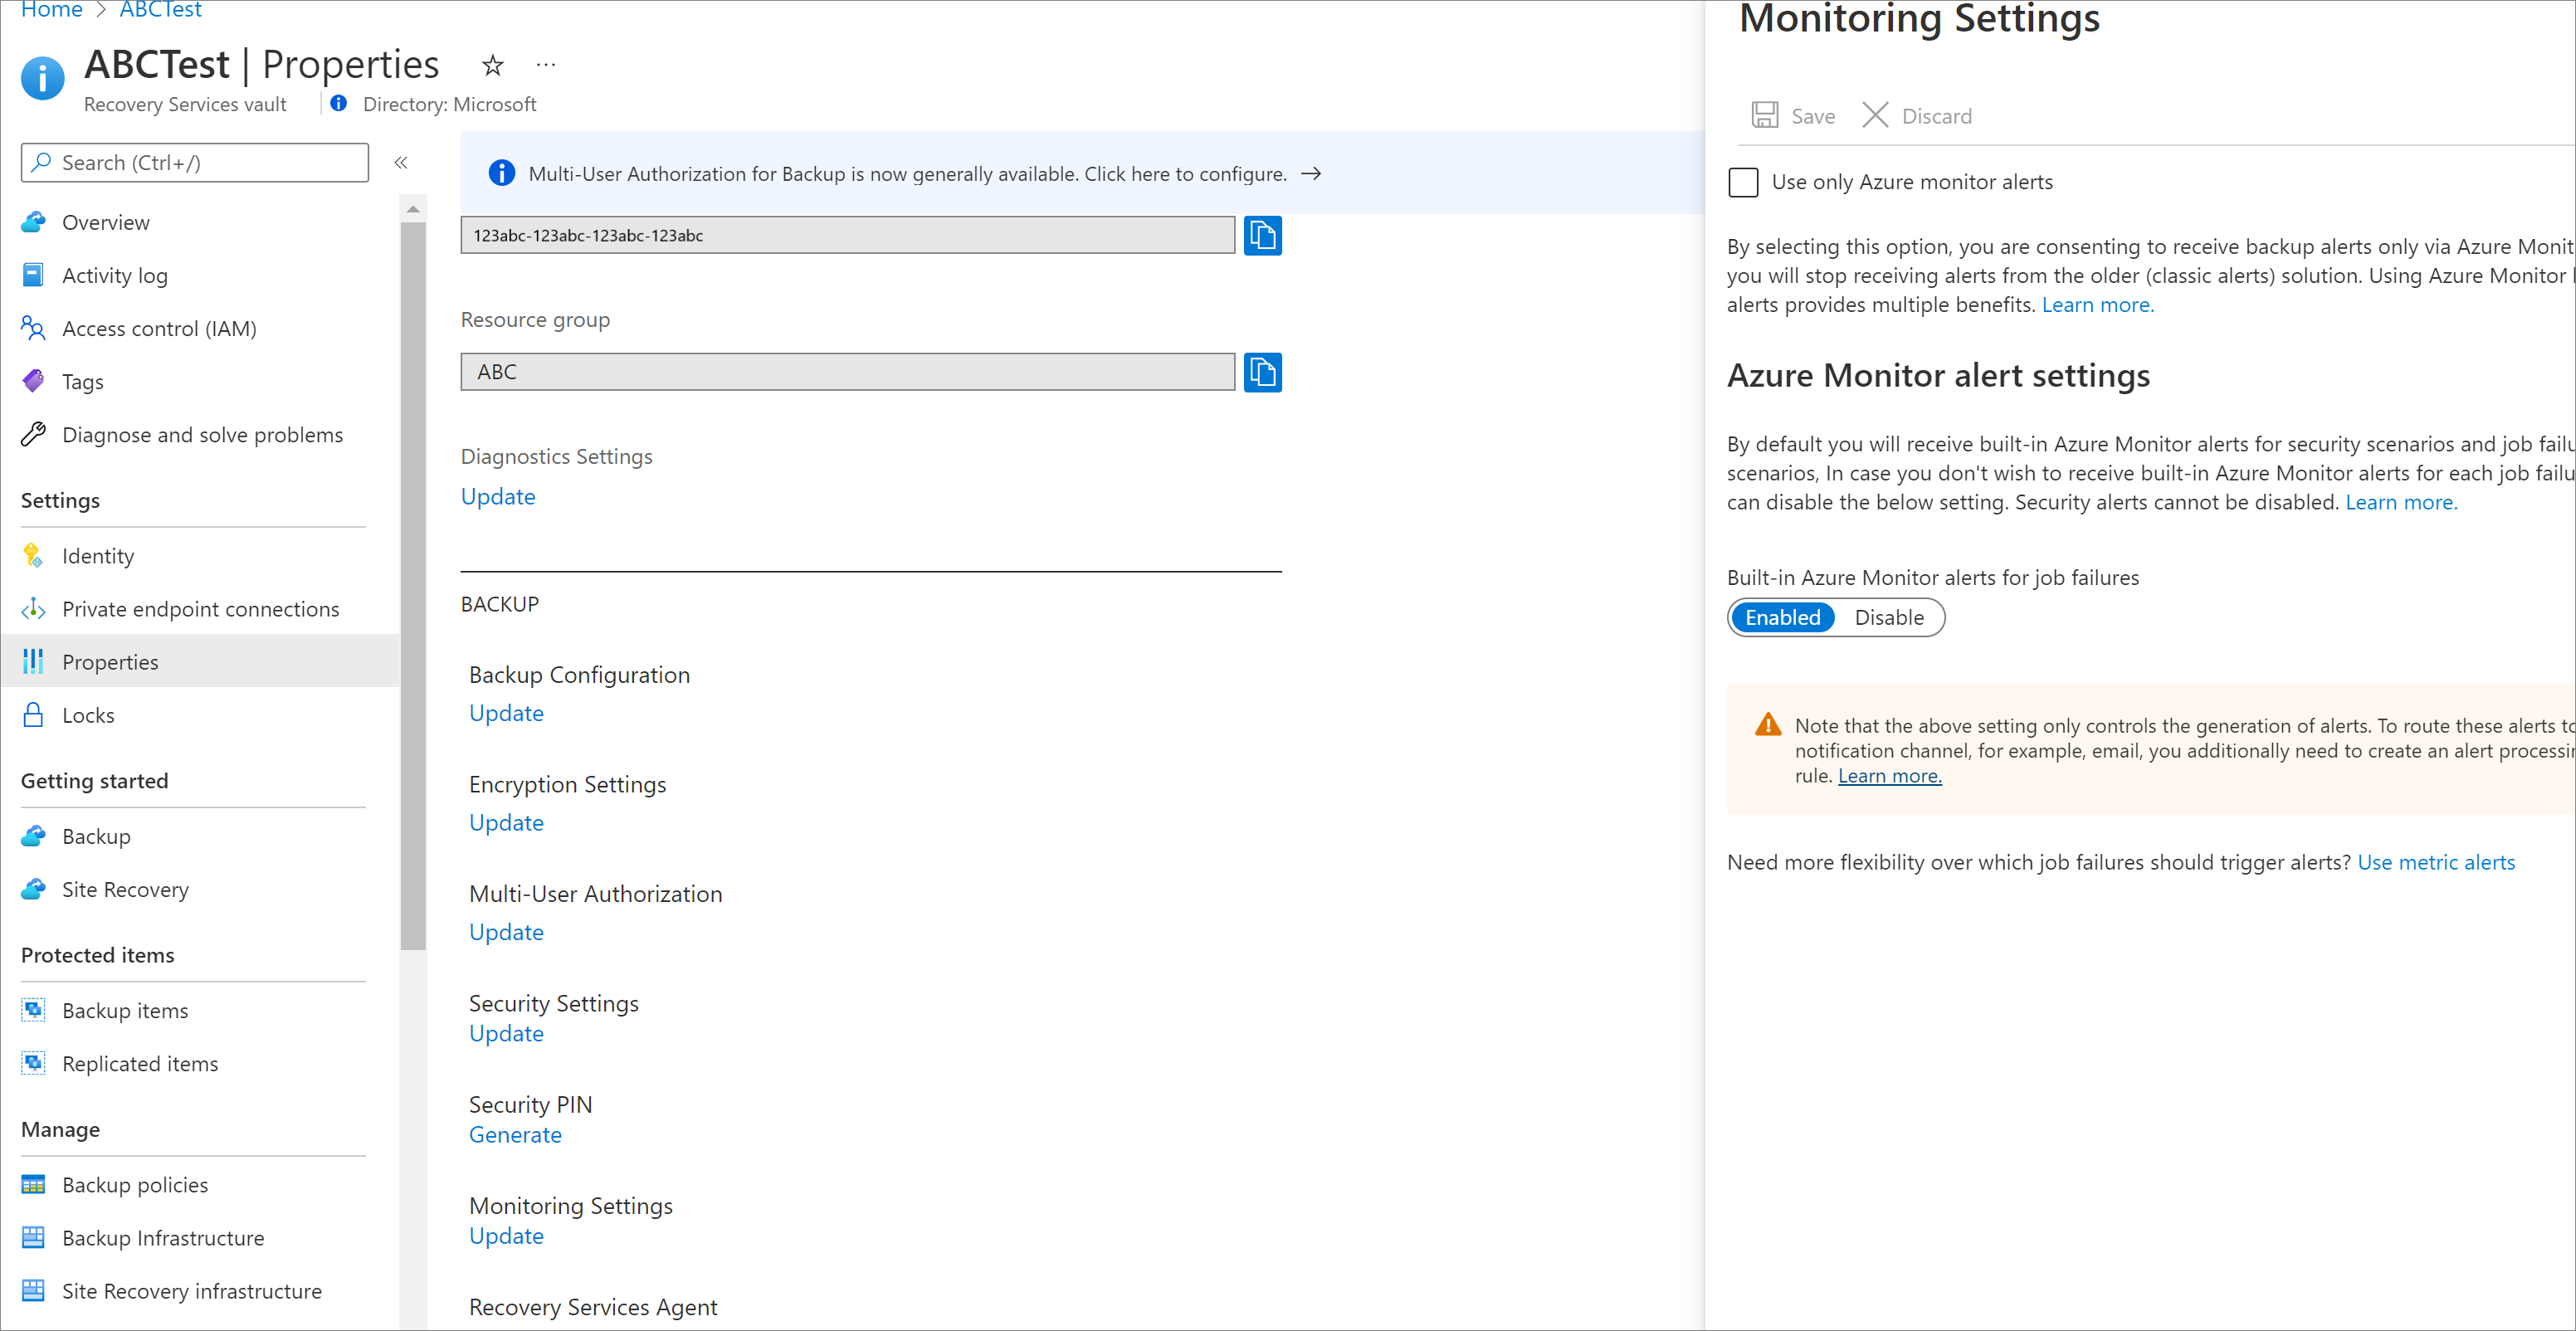 Screenshot showing options to enable or disable built-in Azure Monitoring alerts.